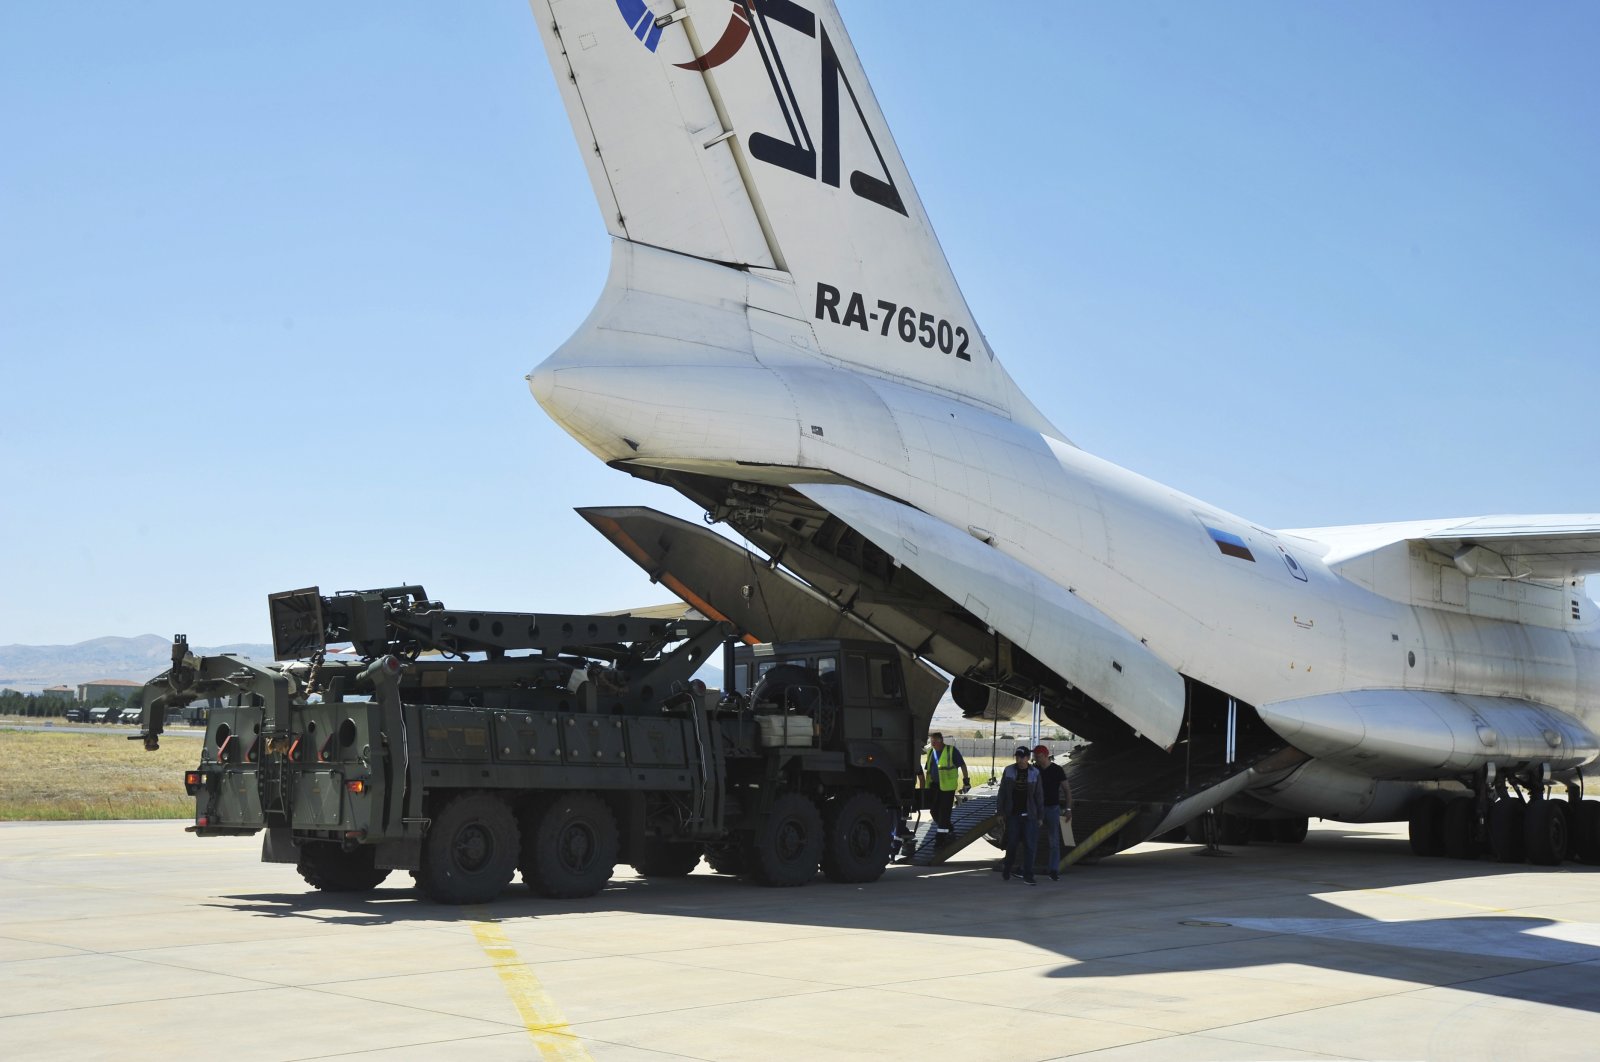 A Russian transport aircraft, carrying parts of the S-400 air defense systems, lands at Murted military airport outside Ankara, Turkey, Aug. 27, 2019. (Turkish Defense Ministry via AP)